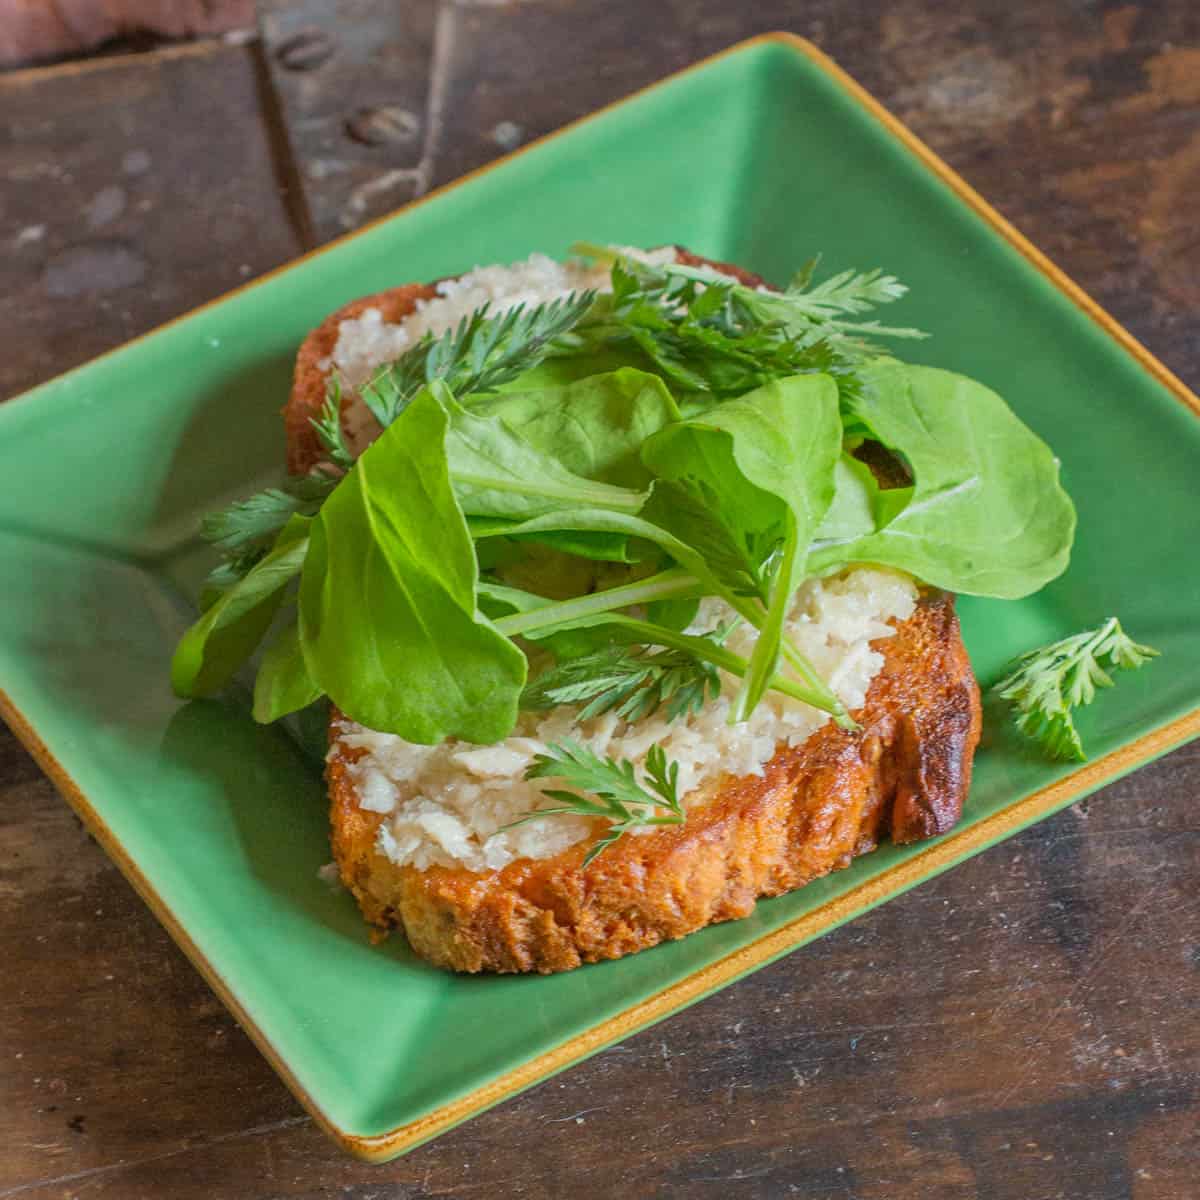 a piece of toast with spread, herbs and greens